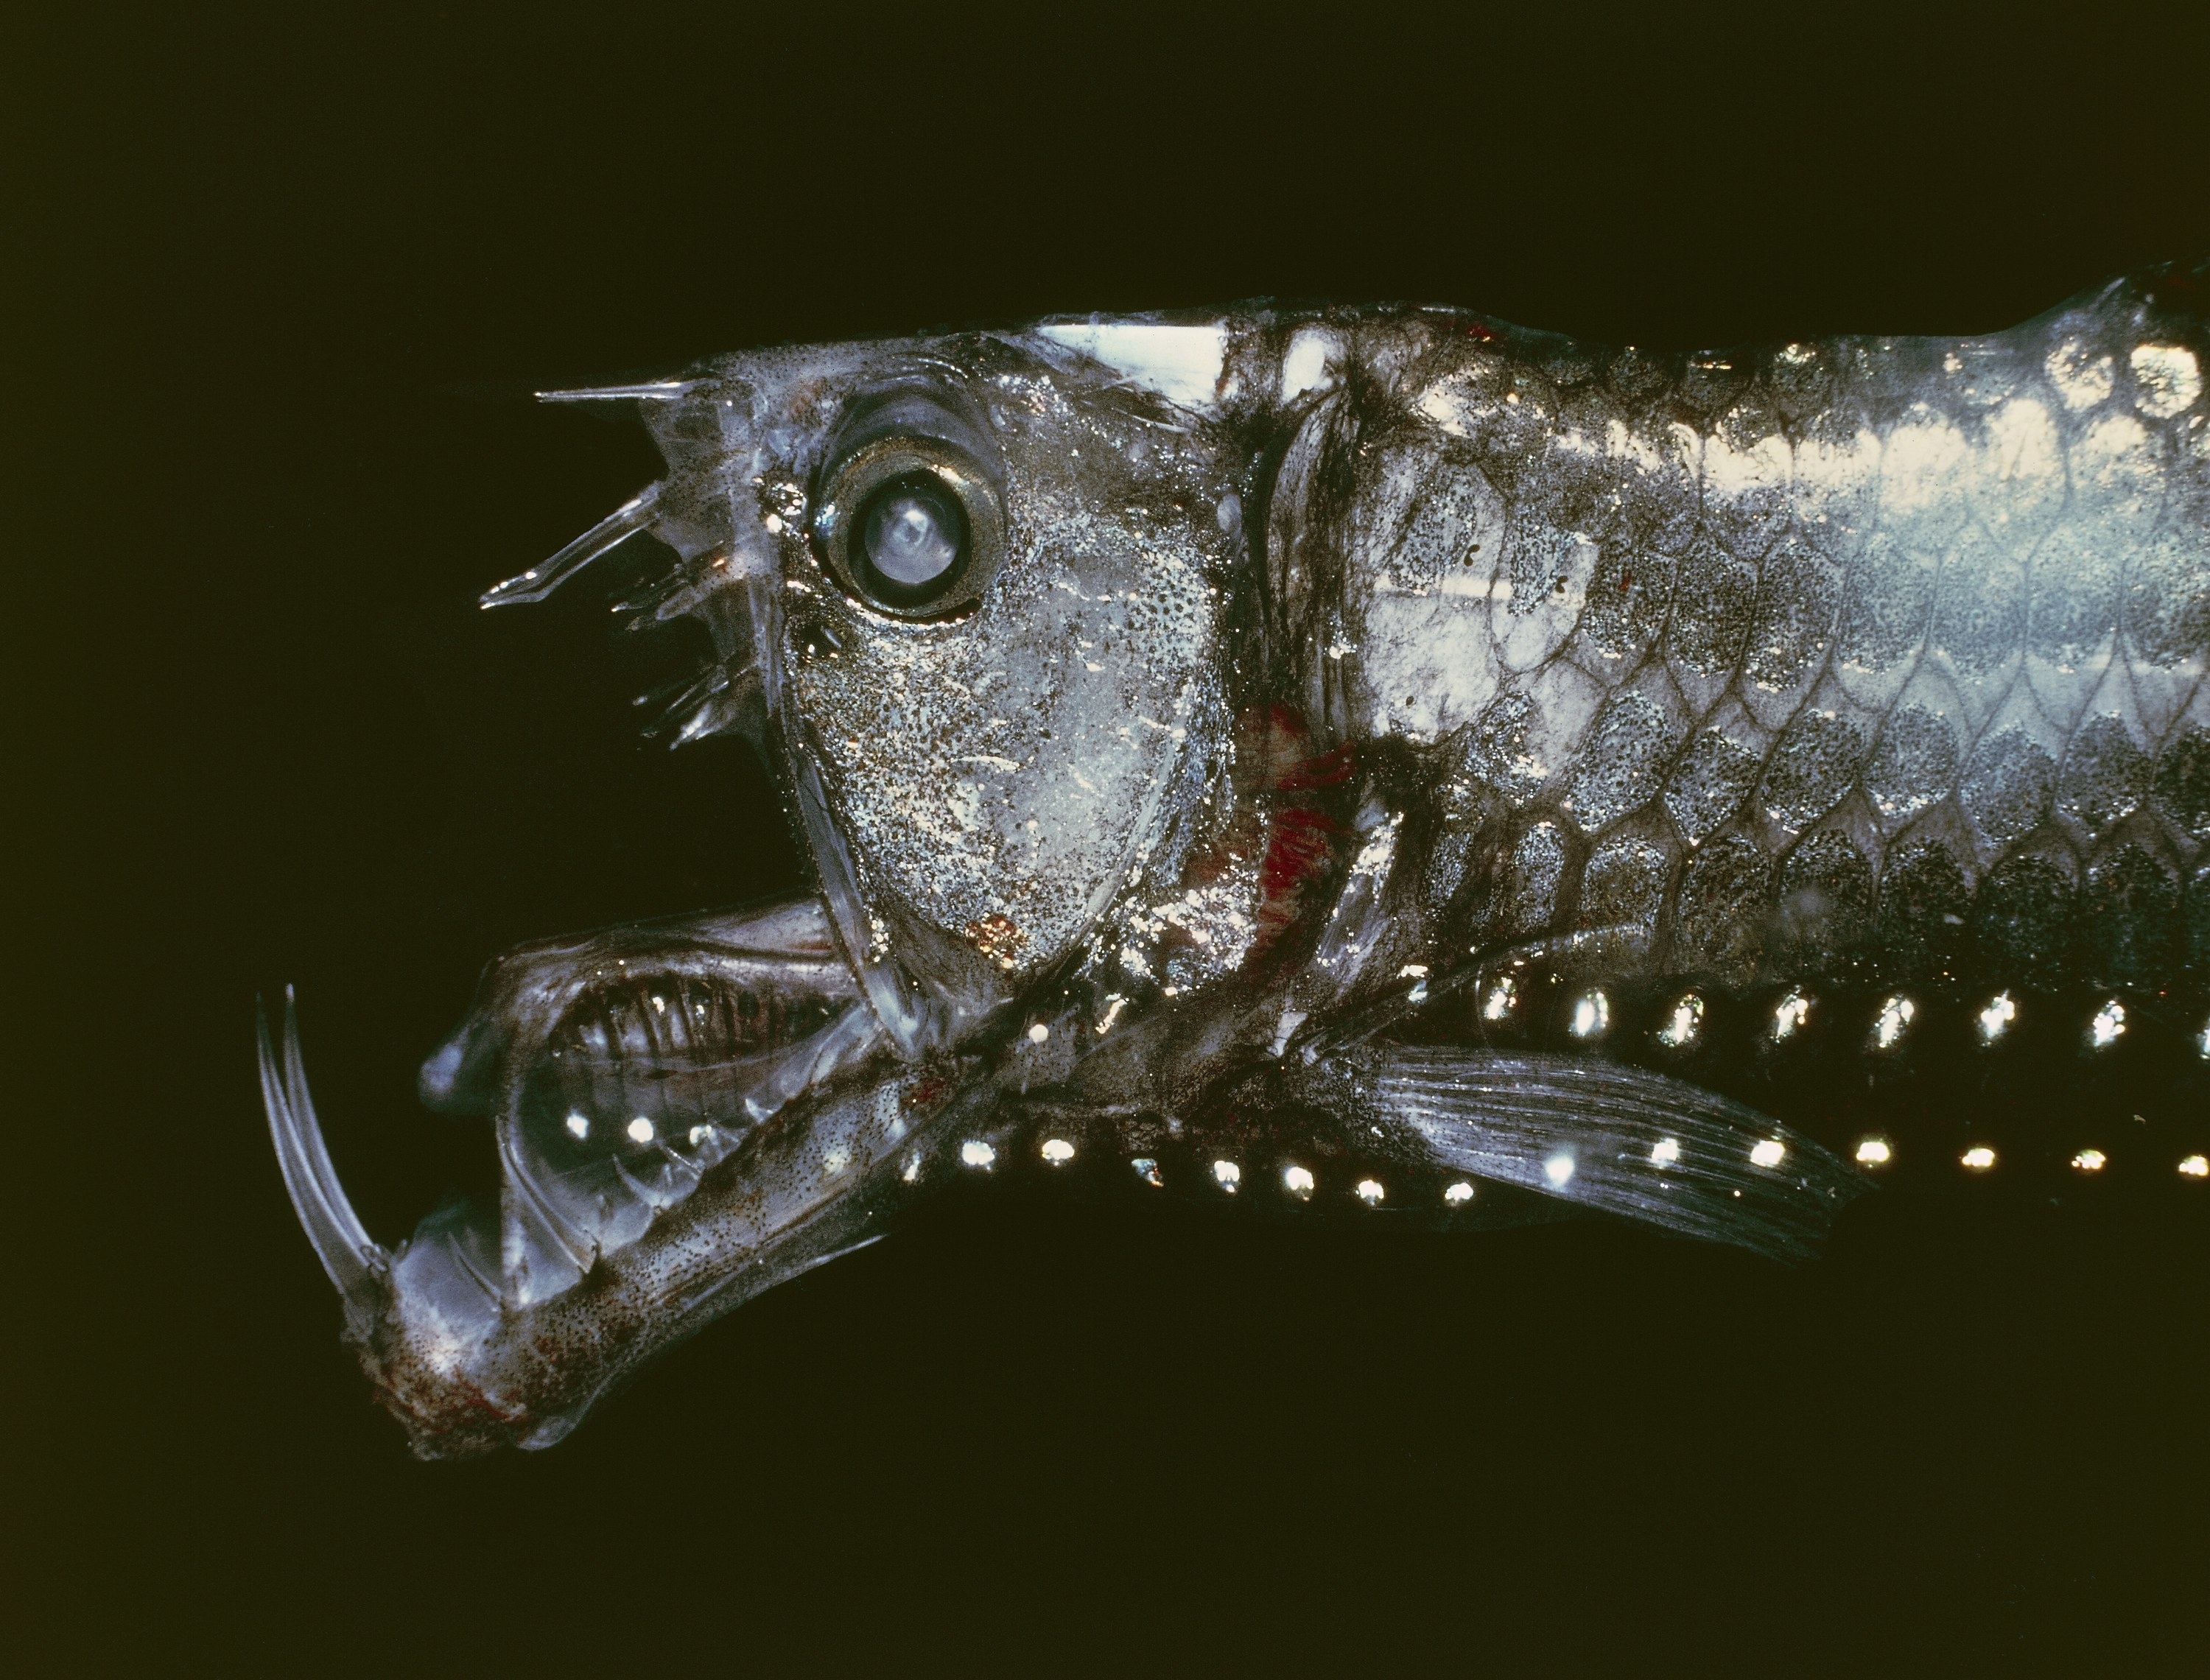 Side profile of a viperfish with its mouth open